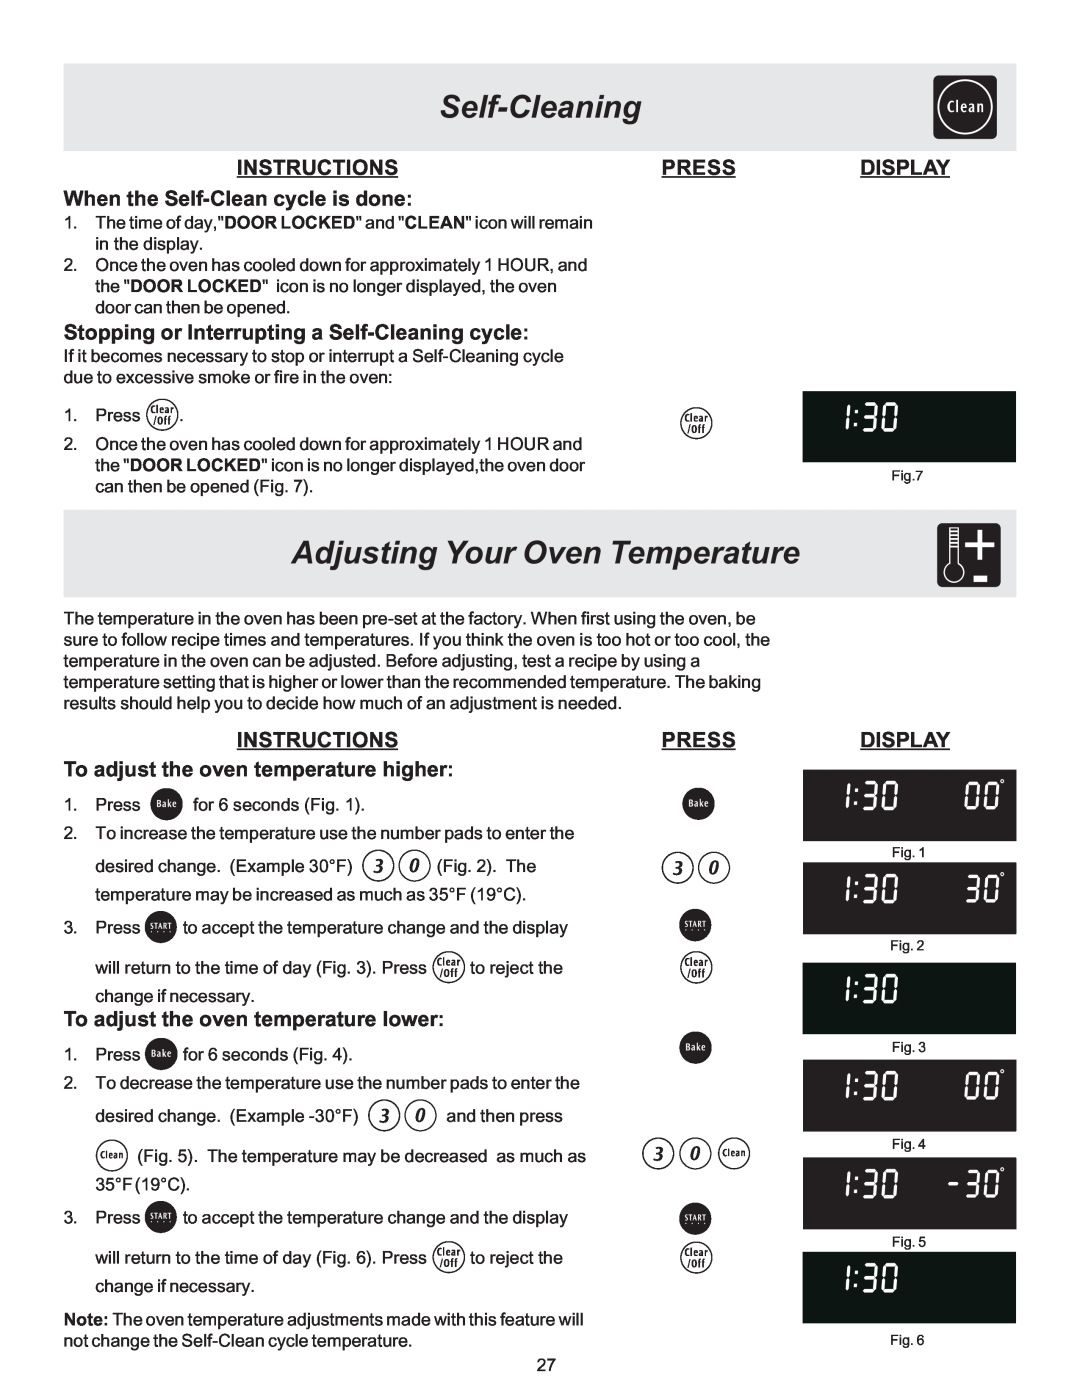 Frigidaire 316417137 REV-A Adjusting Your Oven Temperature, When the Self-Clean cycle is done, Self-Cleaning, Instructions 